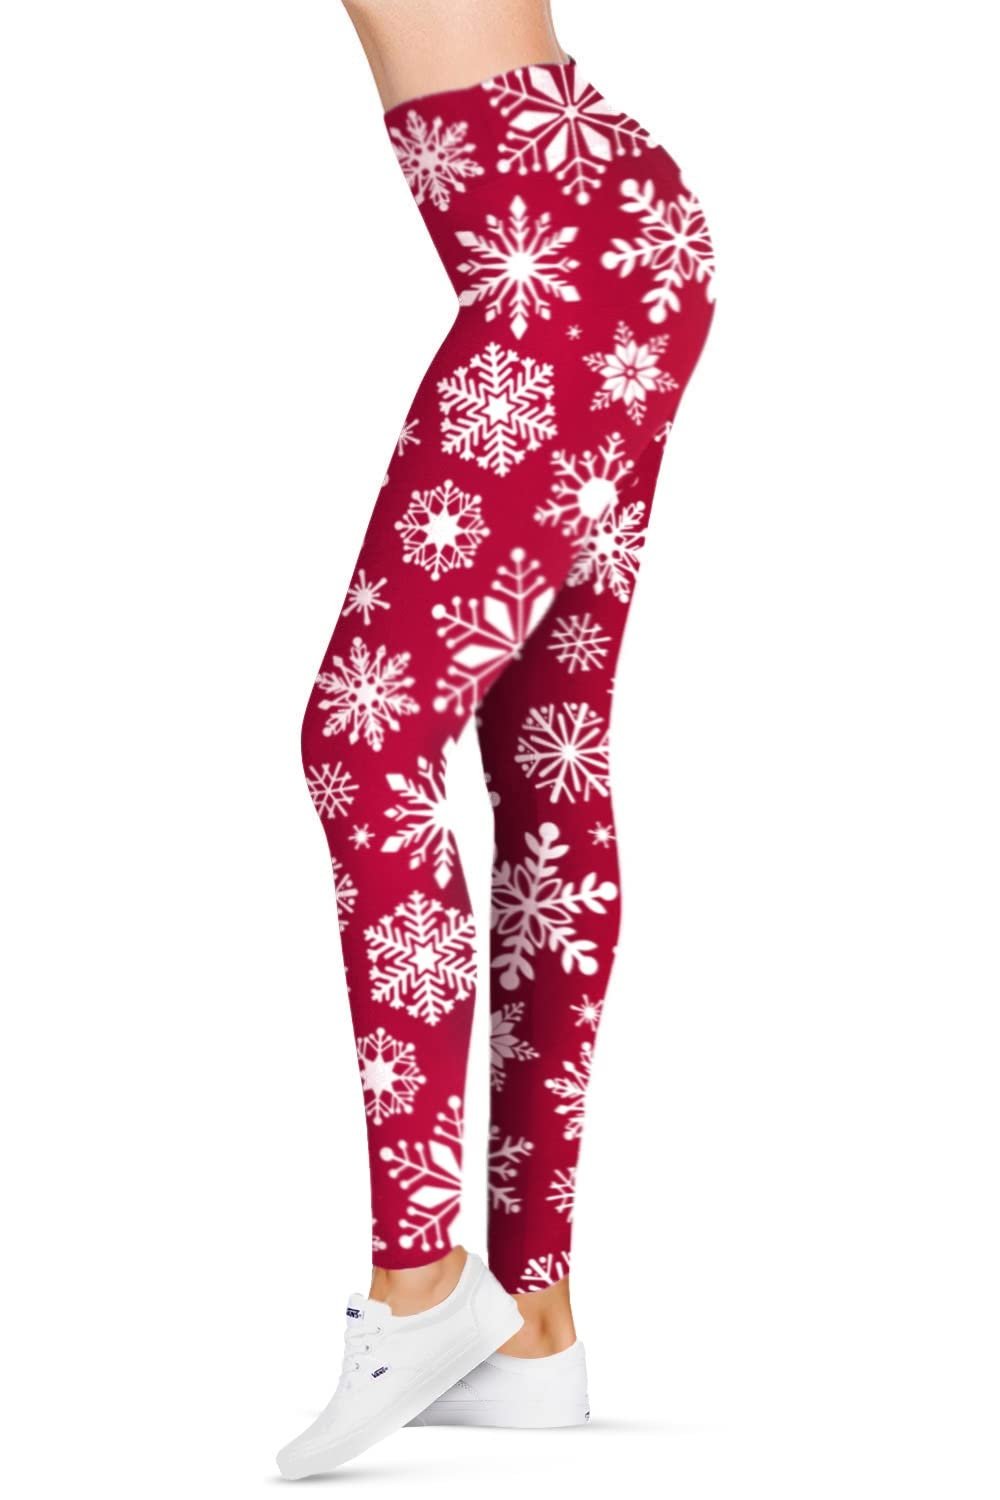 SATINA Christmas Leggings for Women - Buttery Soft Highwaisted Red Snowflake Holiday Leggings (Plus Size)